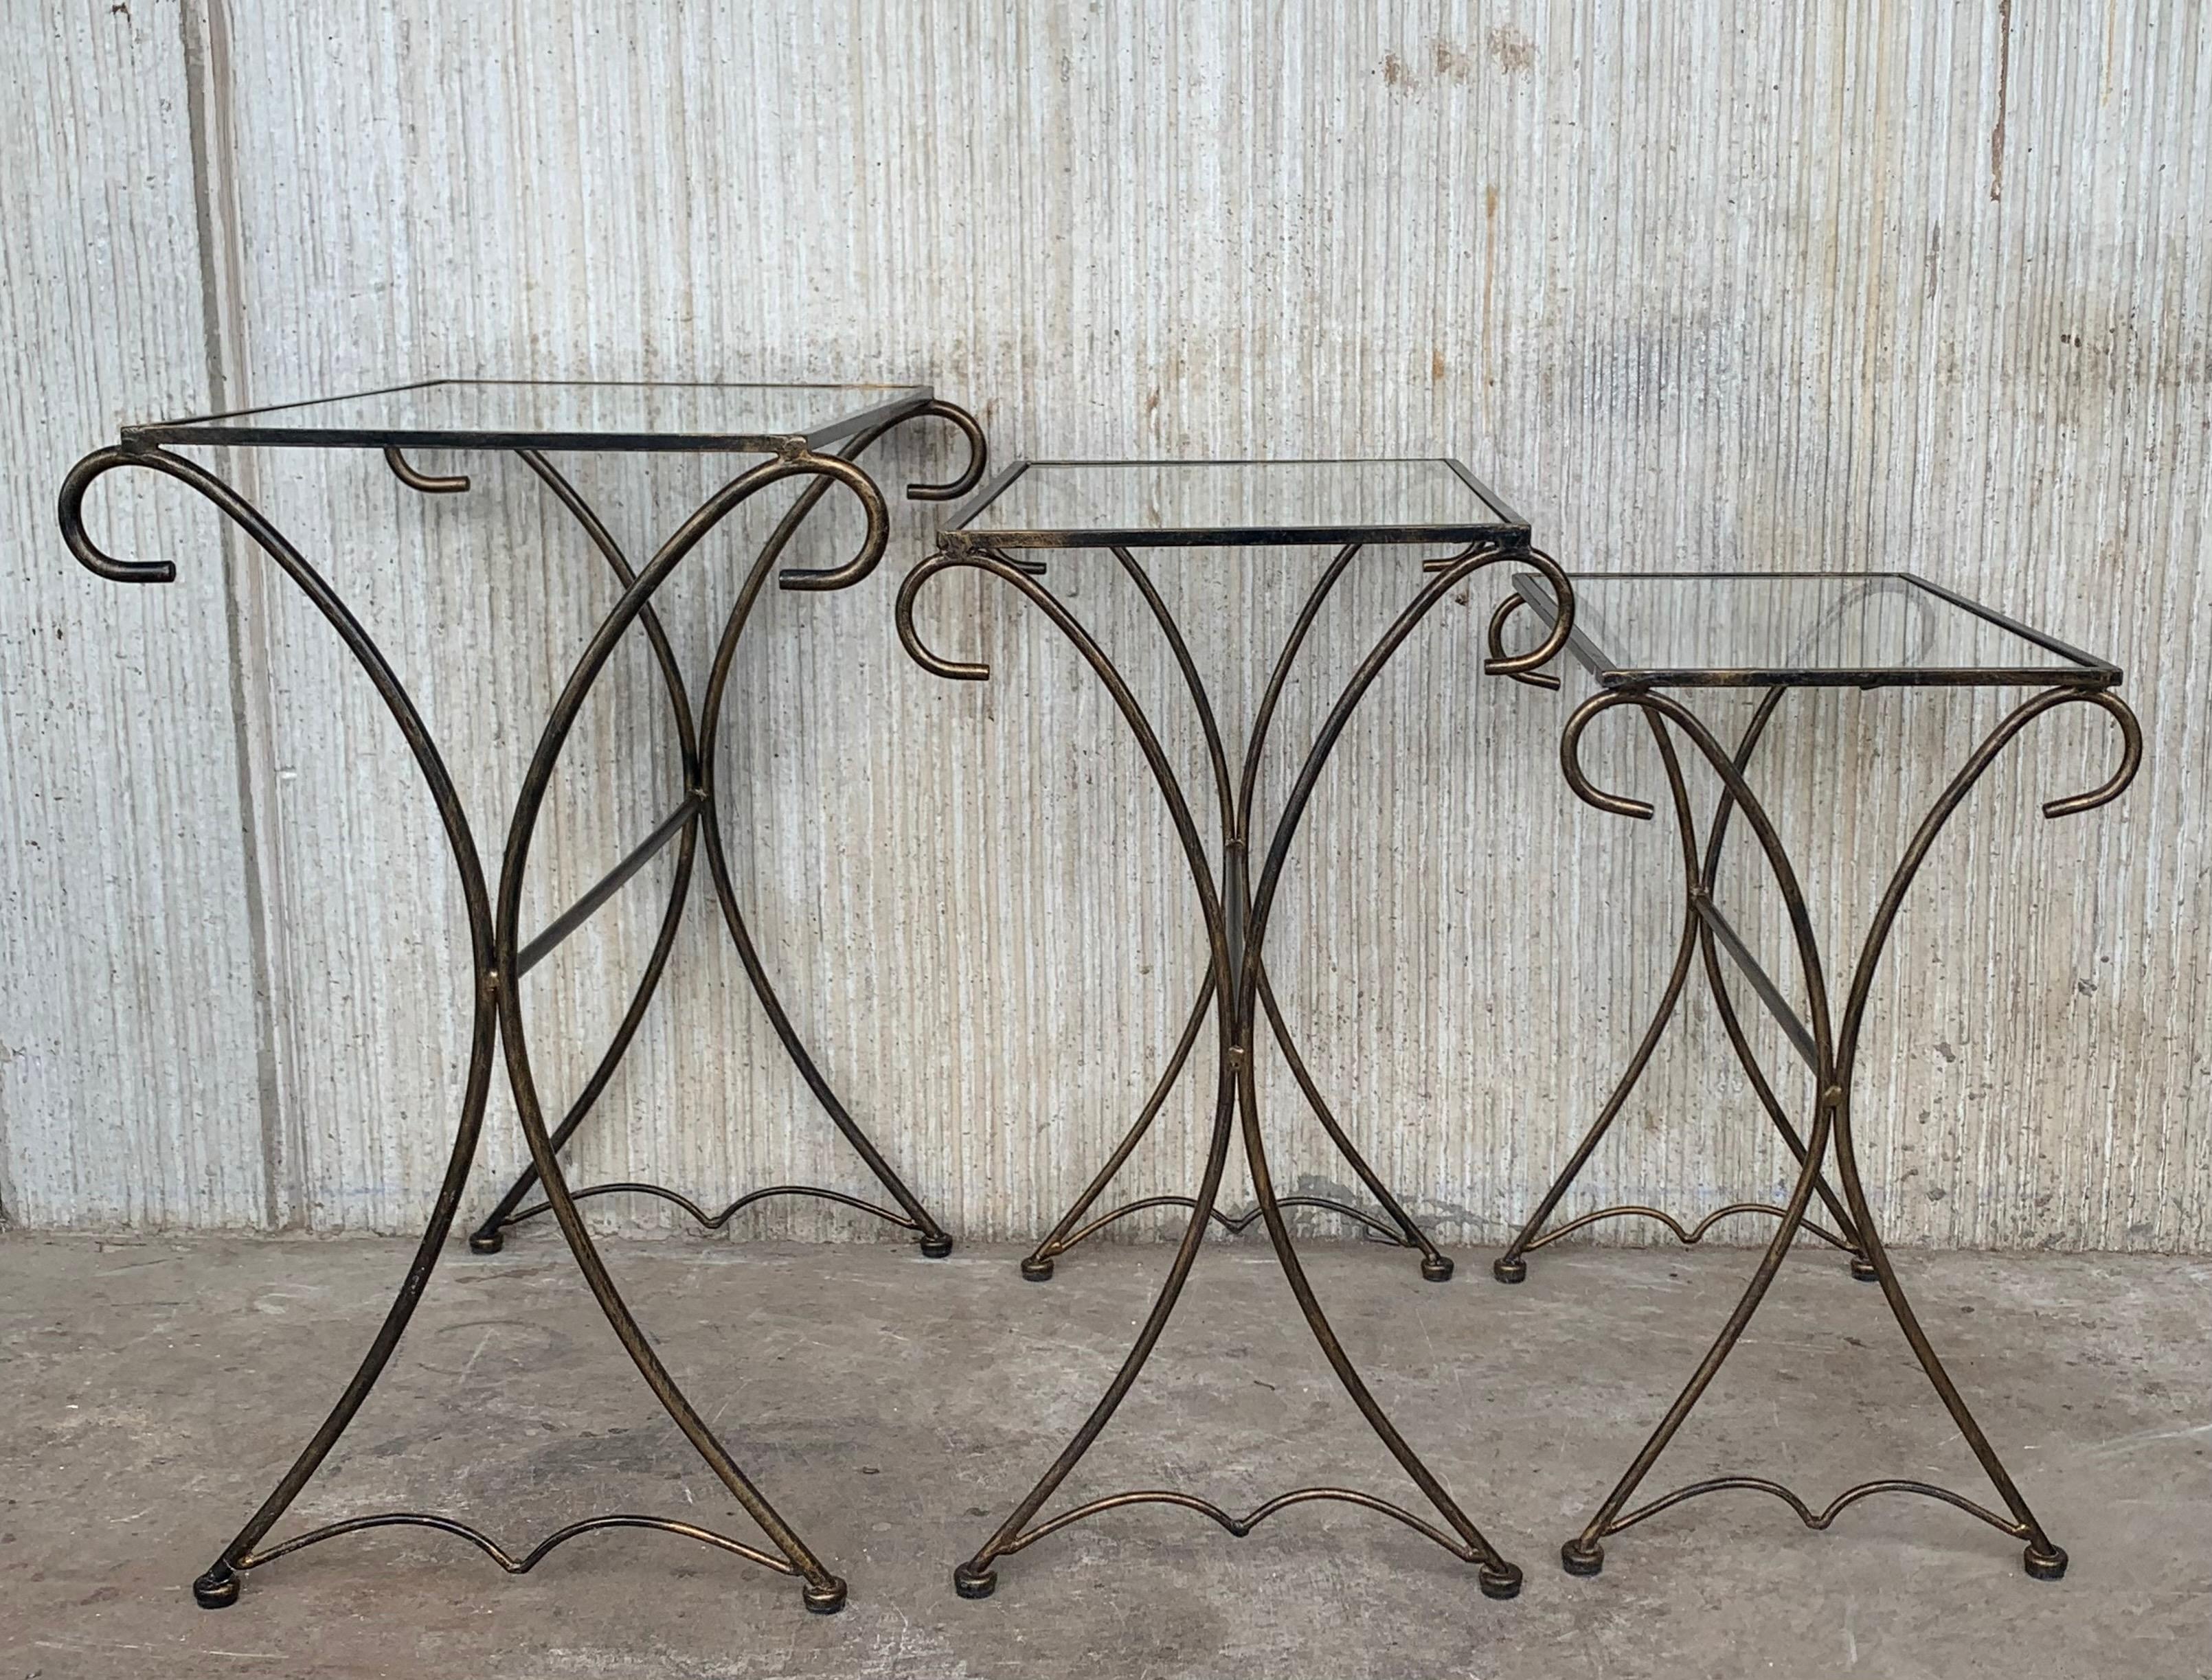 Spanish Midcentury Scrolling Iron Patio Nesting Side Tables with Glass Tops, Set of 3 For Sale